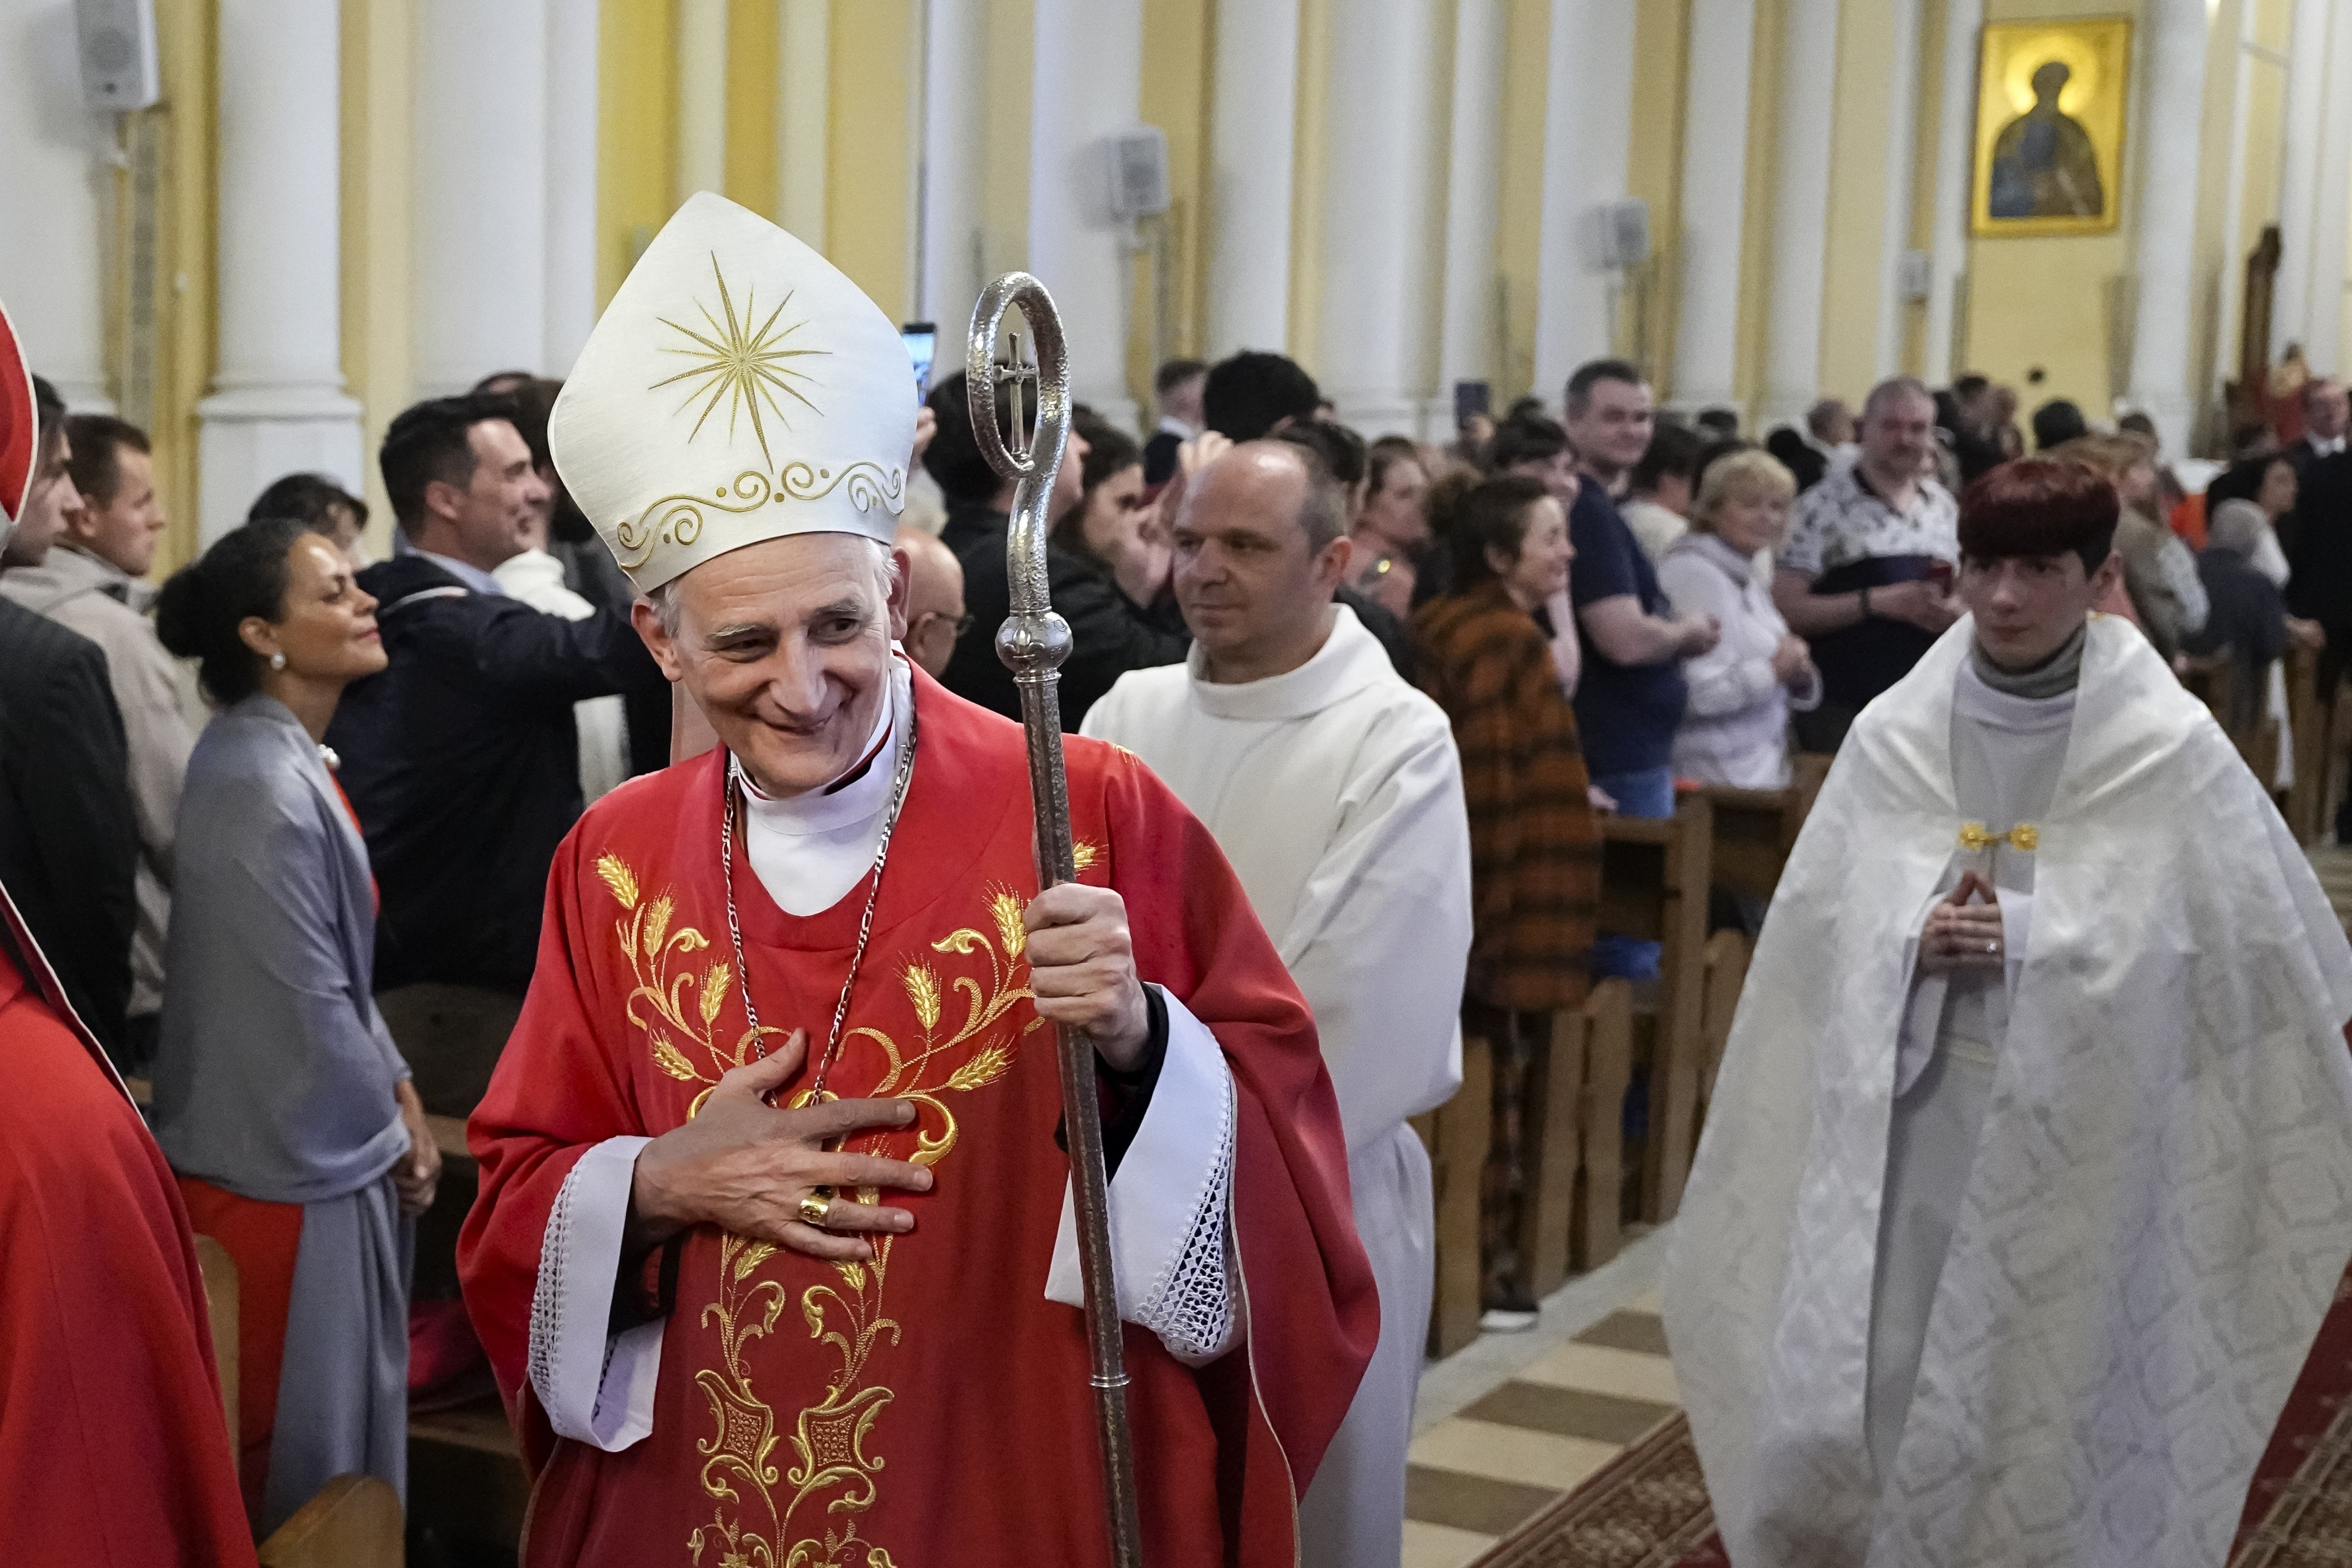 Cardinal Matteo Zuppi welcomes parishioners after celebrating Mass at the Cathedral of the Immaculate Conception in Moscow, on June 29. Photo: AP